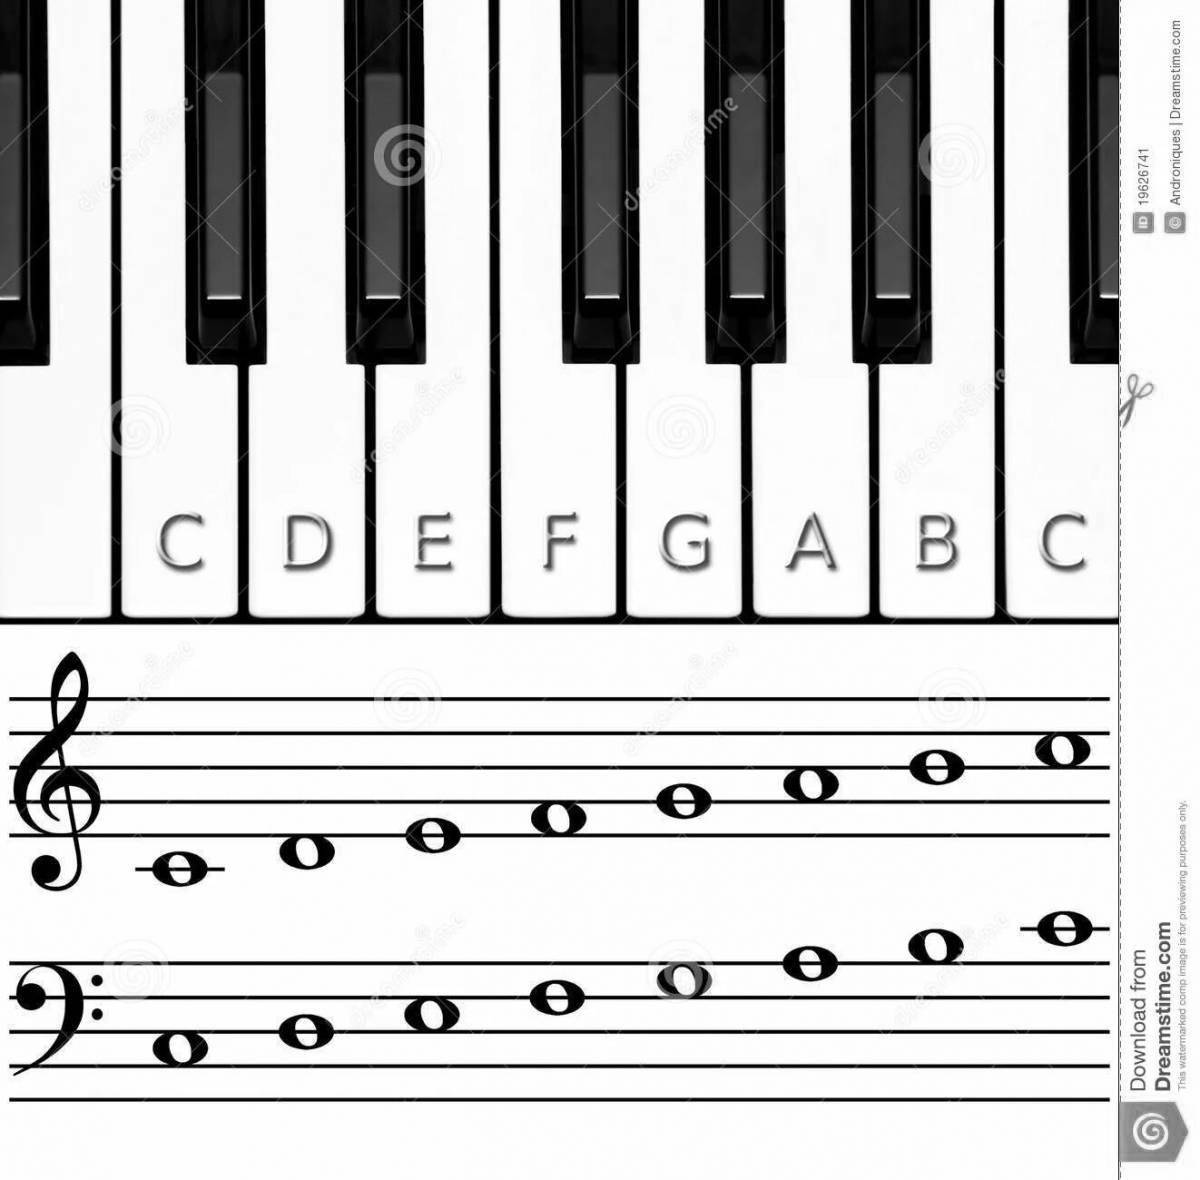 Coloring book exquisite piano keys